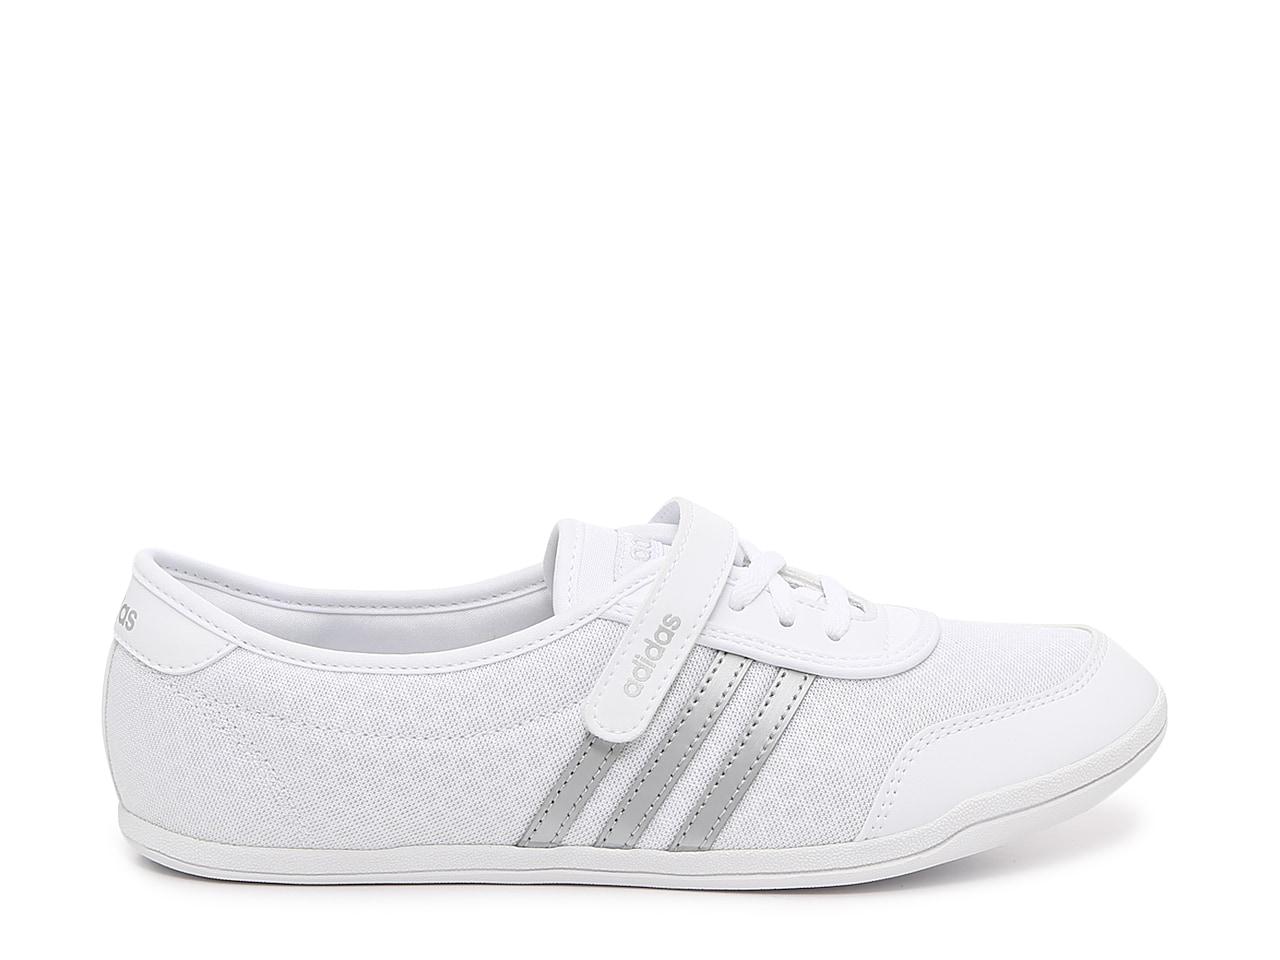 adidas Synthetic Diona Slip-on Sneaker in White - Lyst